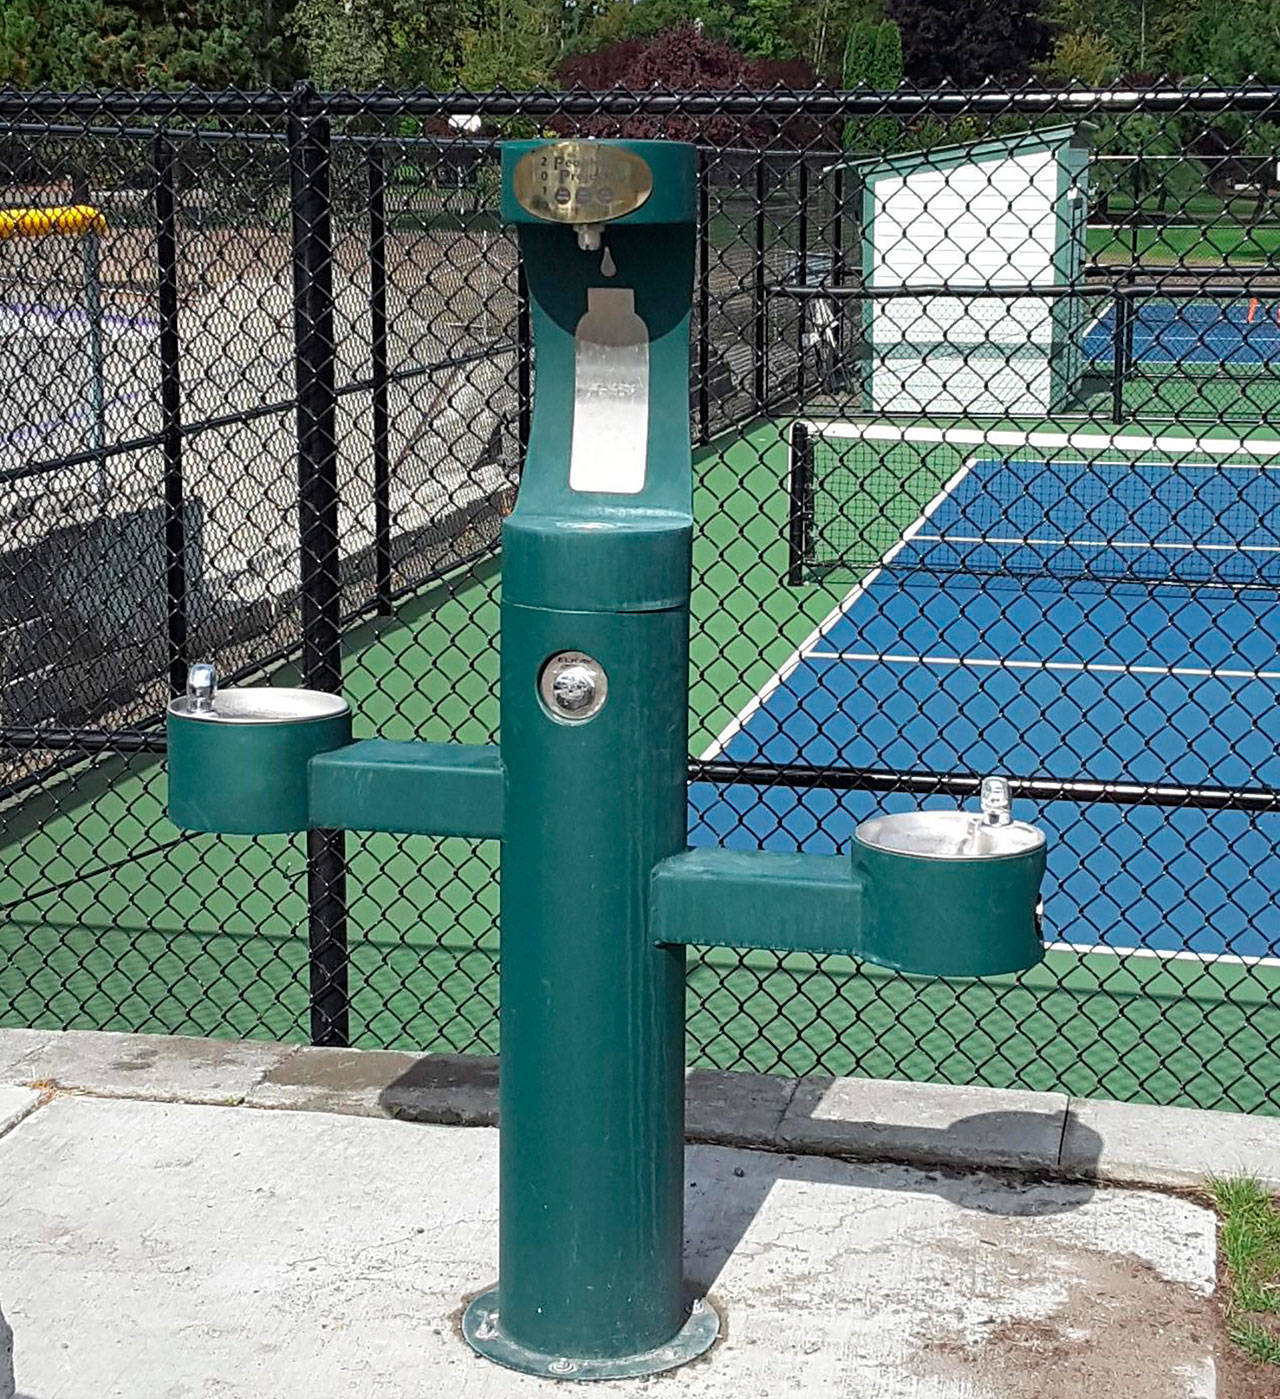 The City of Sequim recently installed nine water stations in city parks, including this one near the pickleball courts and skate park at Carrie Blake Community Park. Photo courtesy of City of Sequim